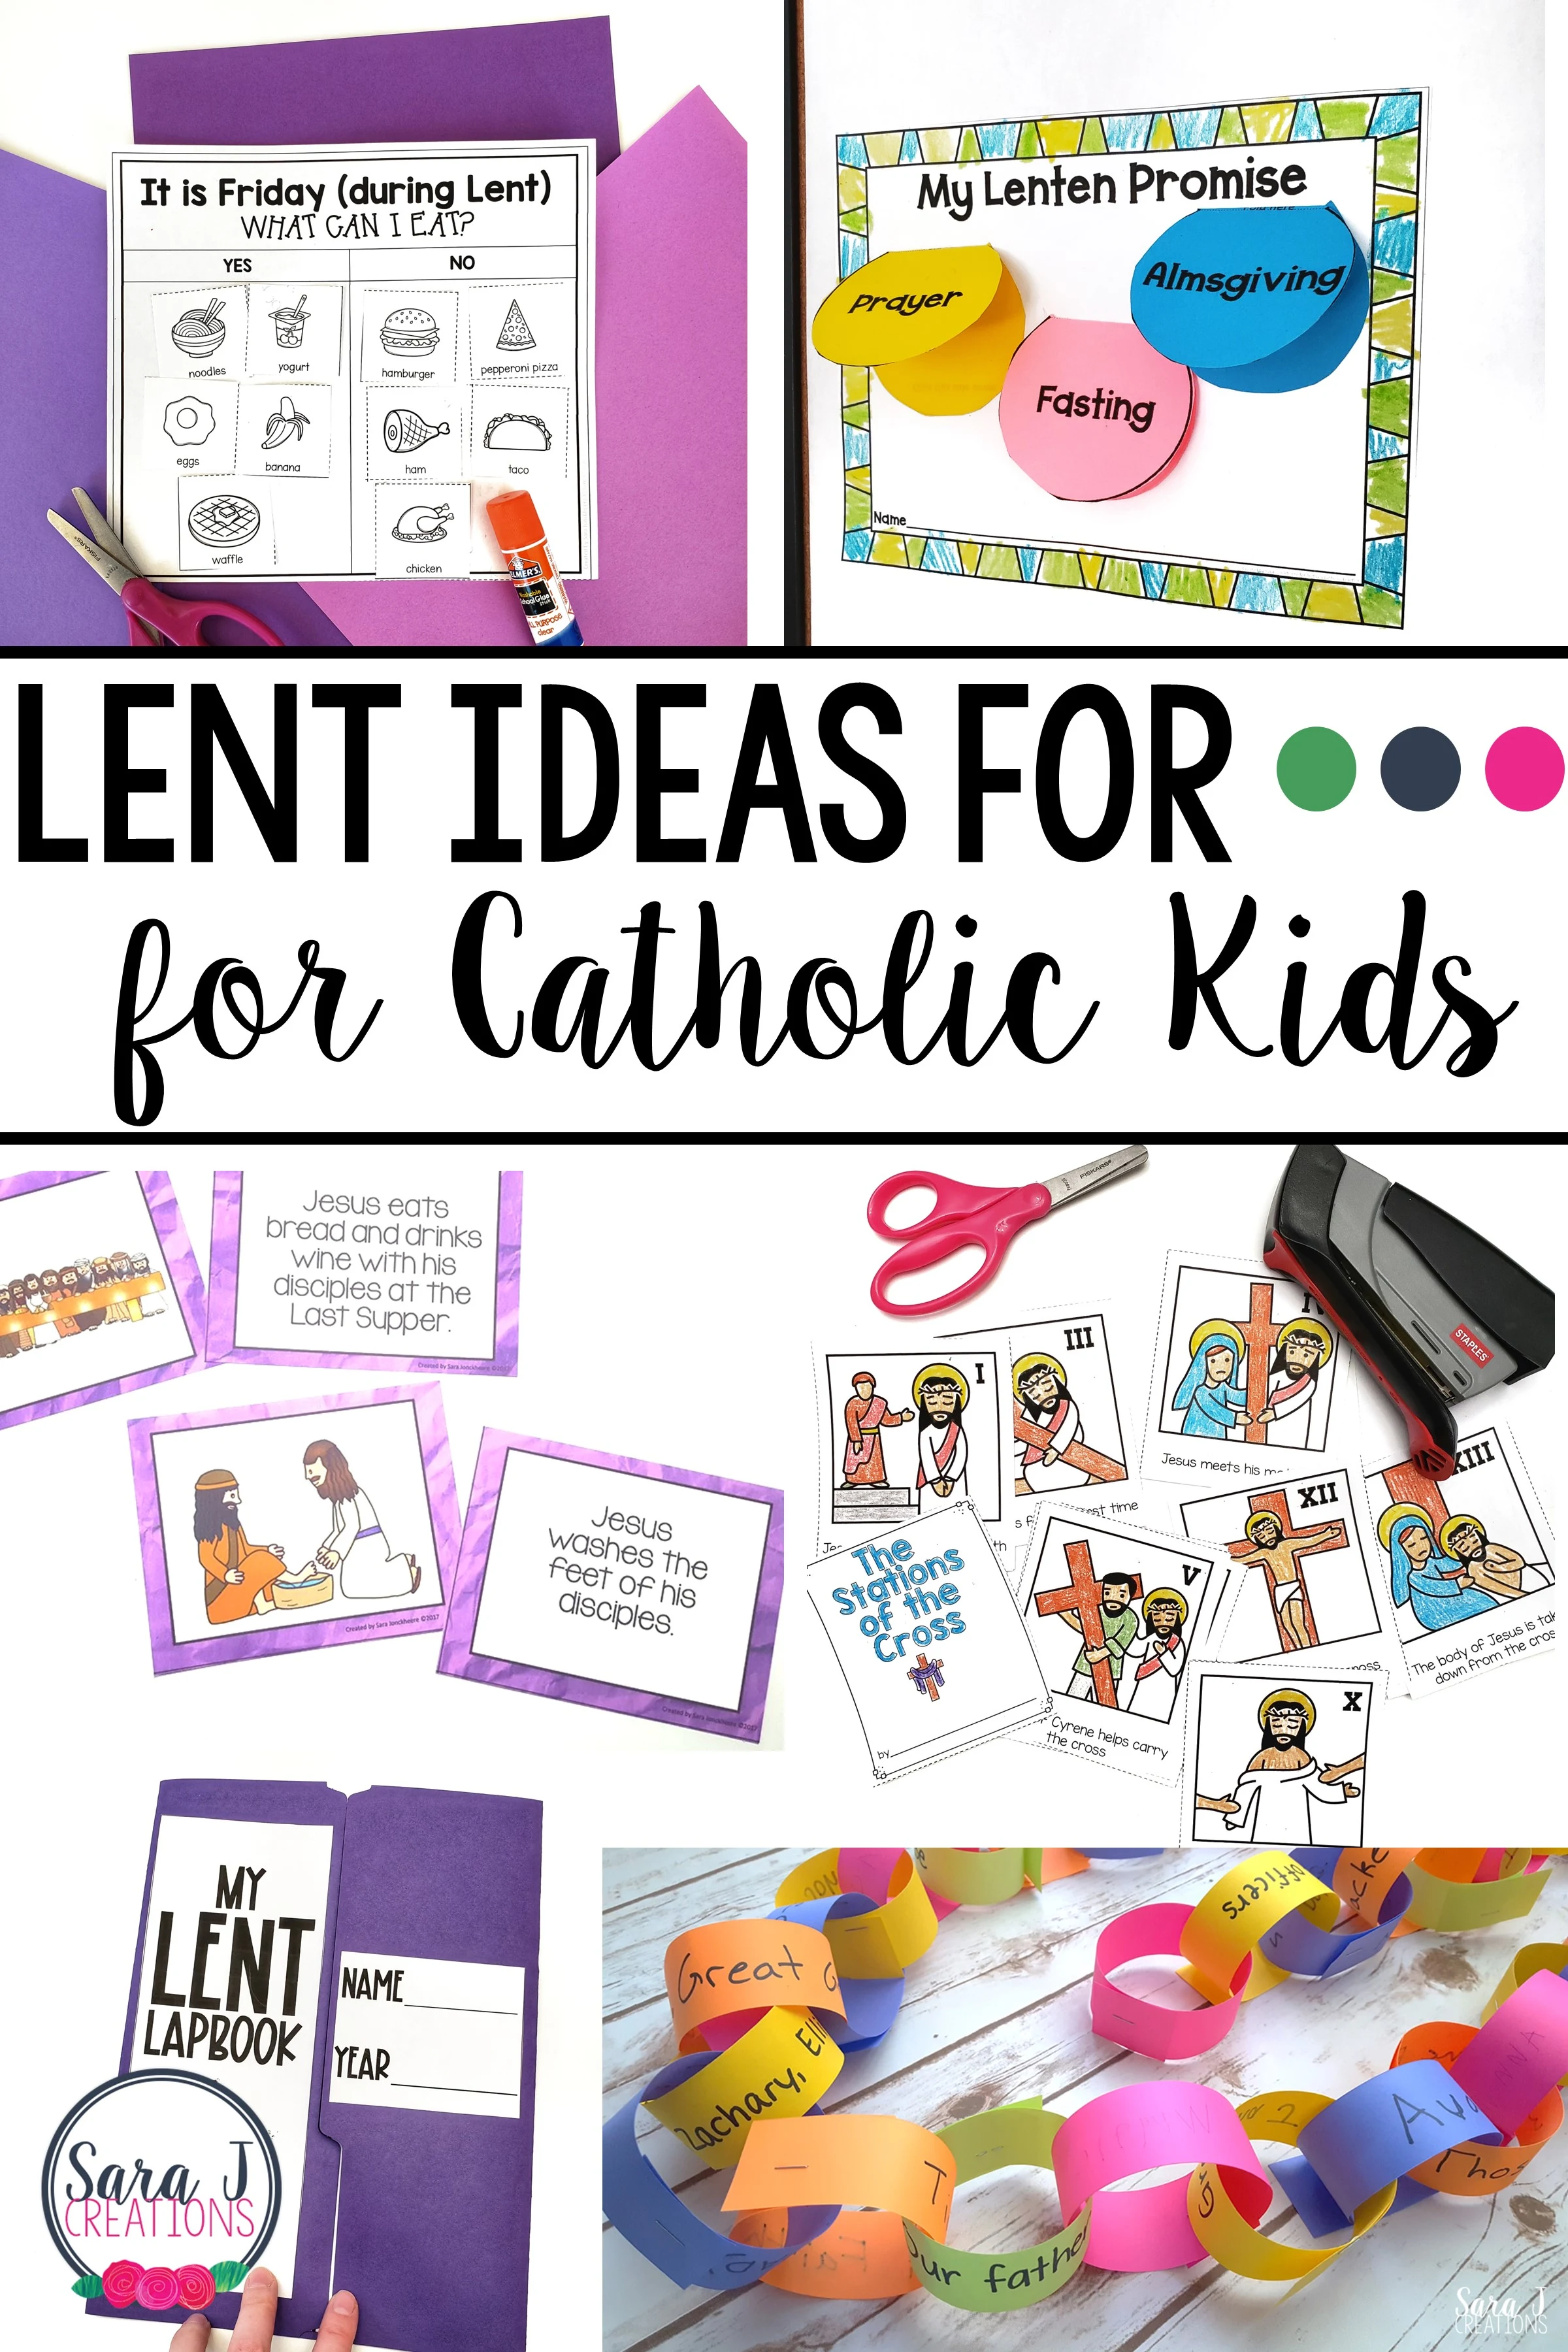 Ideas, freebies, products and more to make Lent with Catholic kids more engaging, hands-on and focused on Jesus while we prepare for Easter.